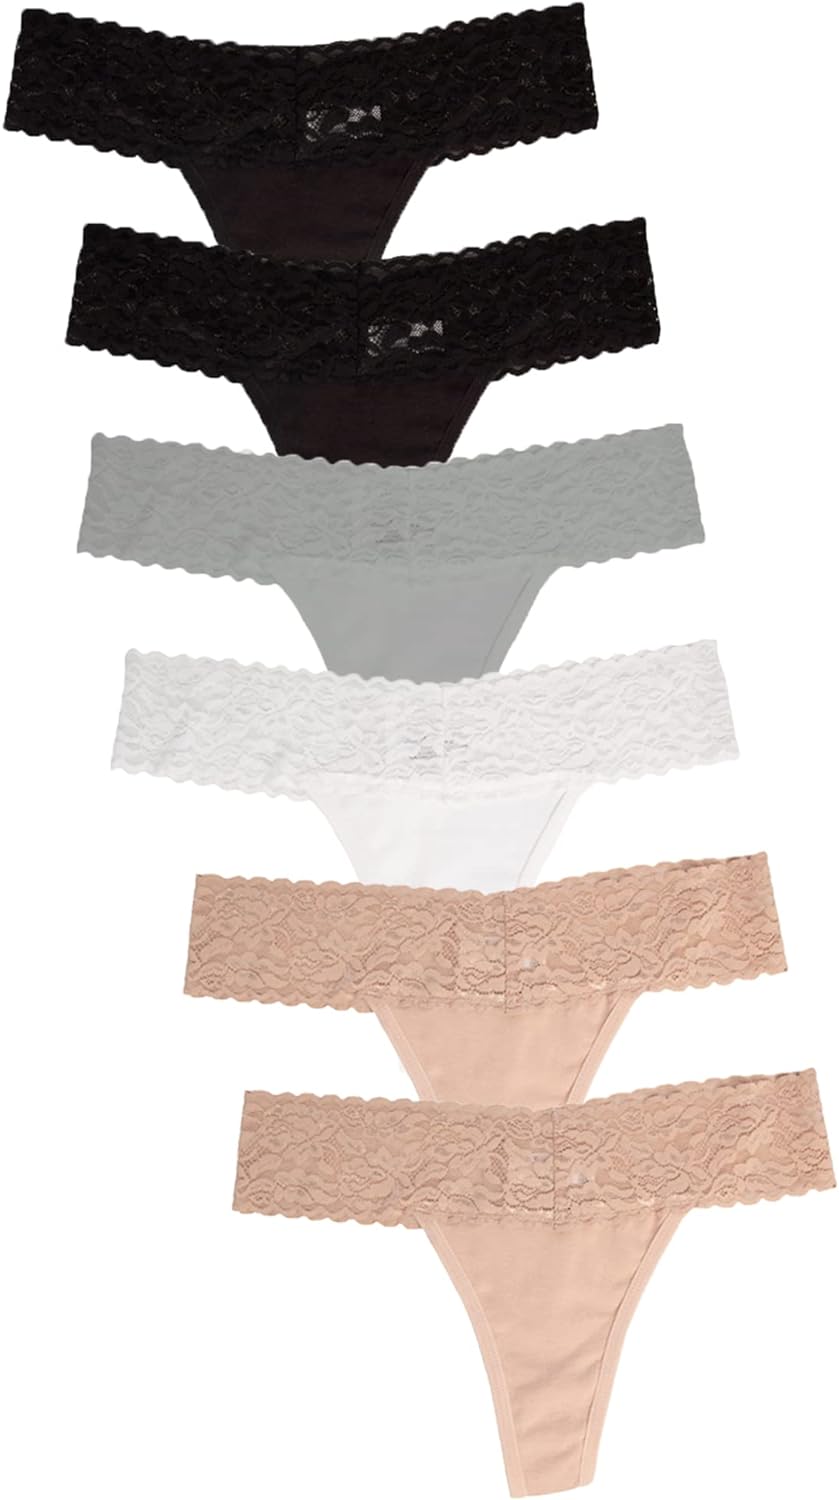  9 Pack Cotton Underwear For Women Sexy Low Rise